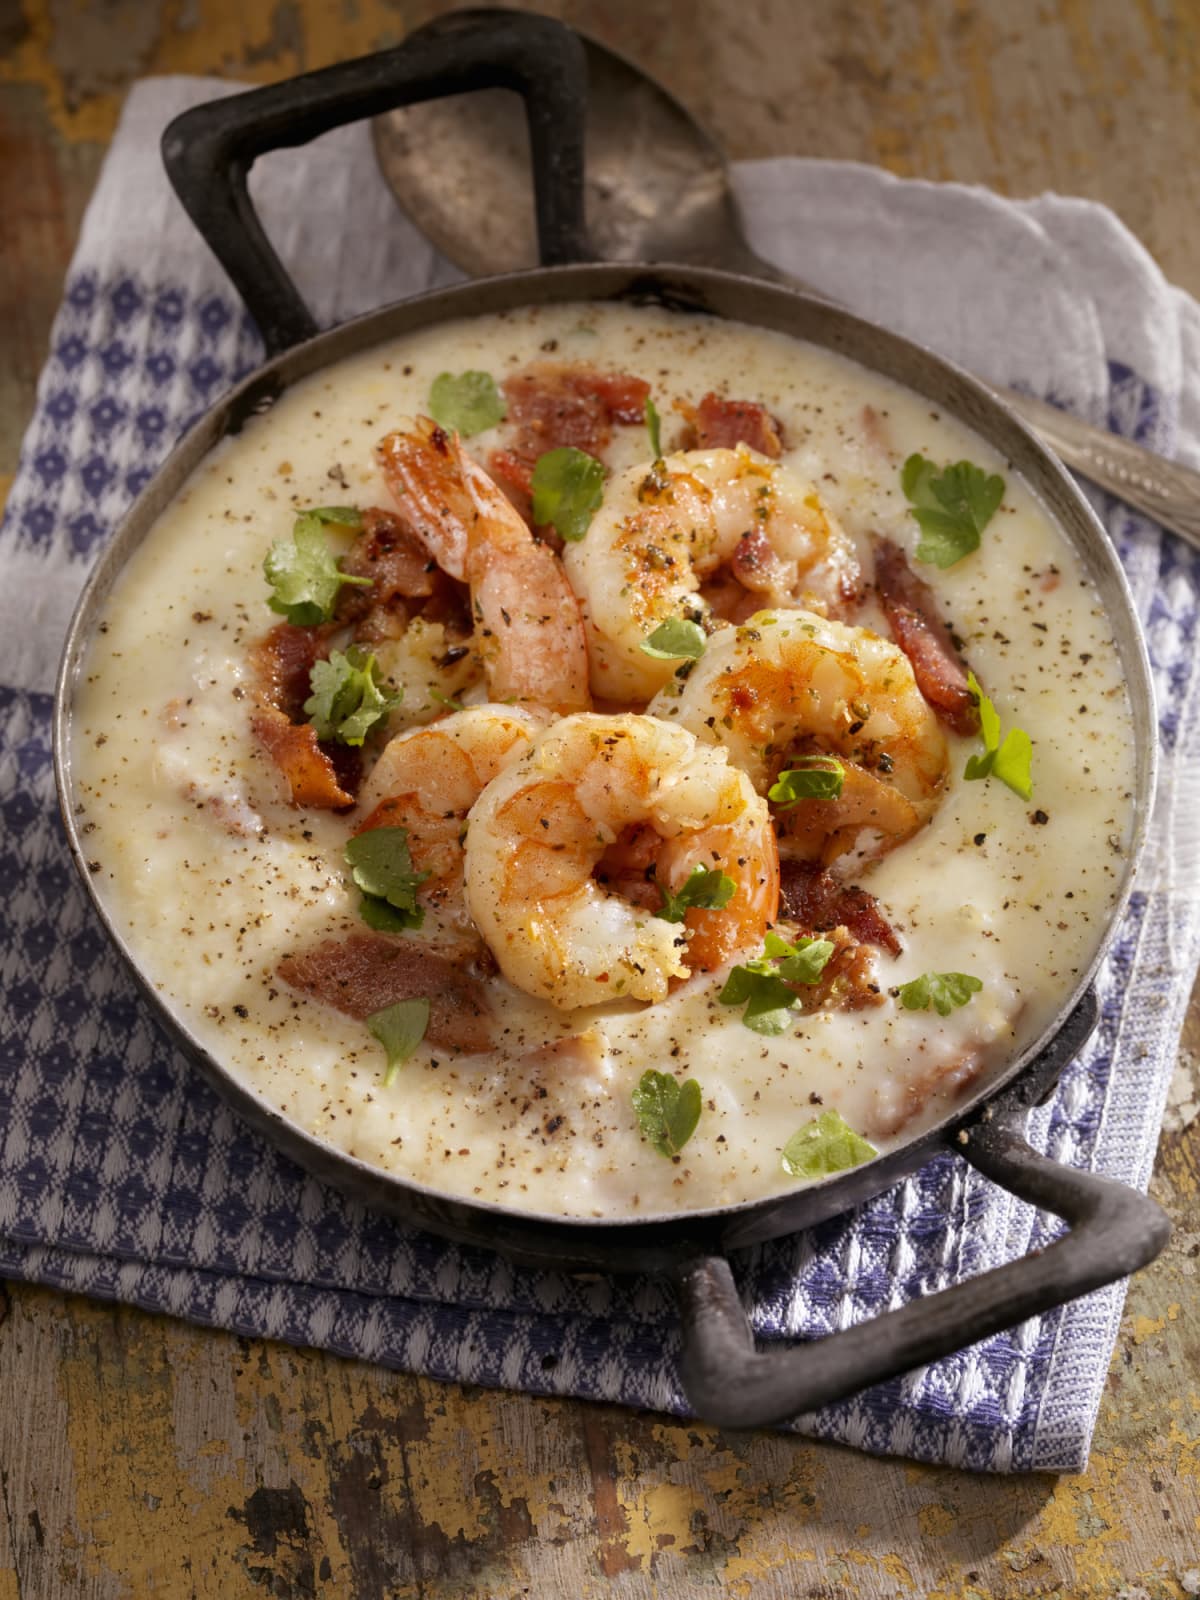 Shrimp and grits in a pot